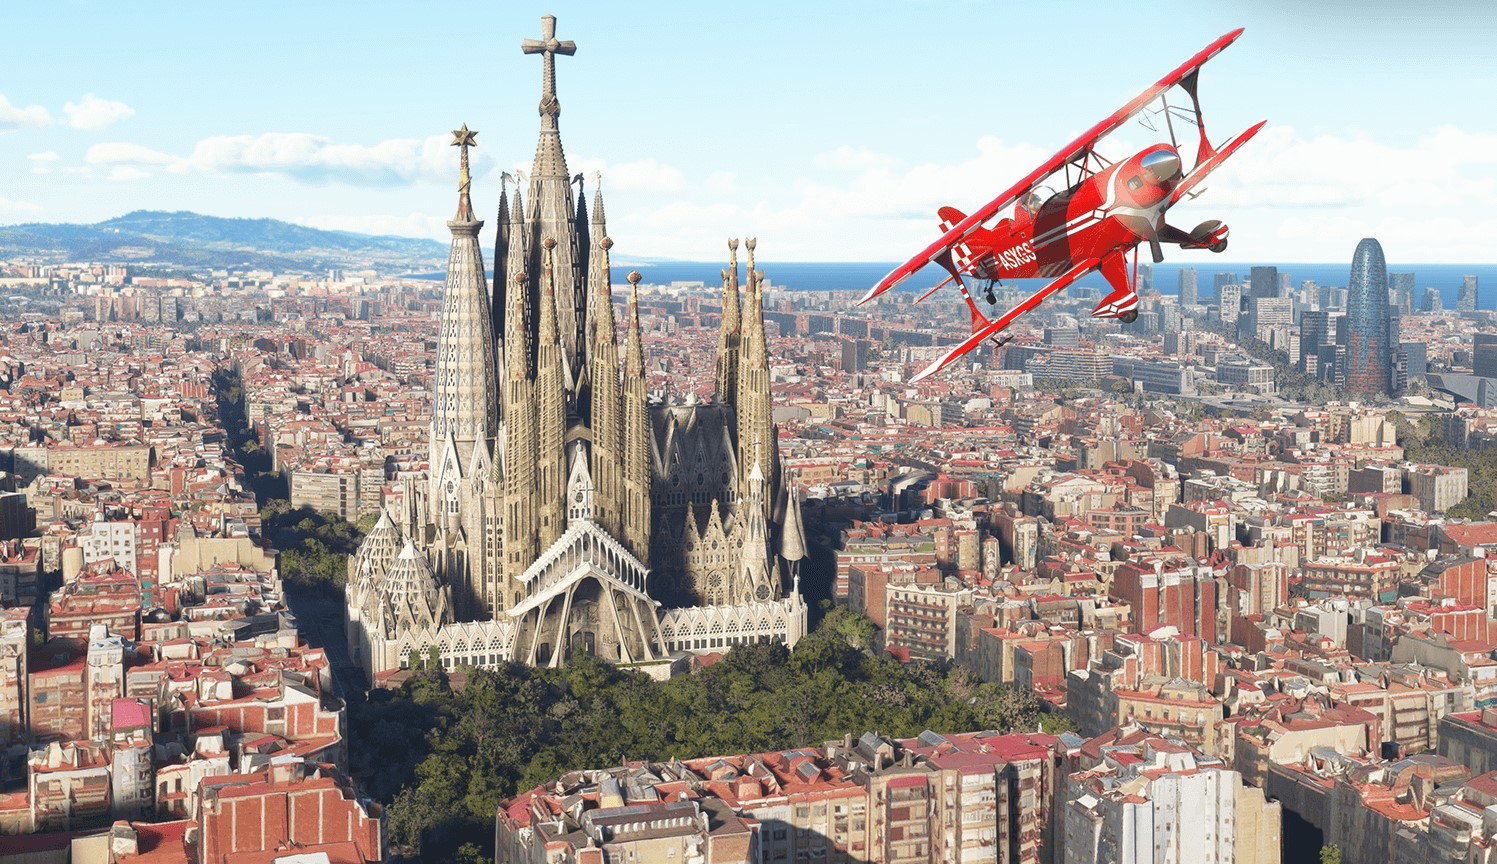  Latest Microsoft Flight Simulator world update fleshes out Spain, Portugal and more 